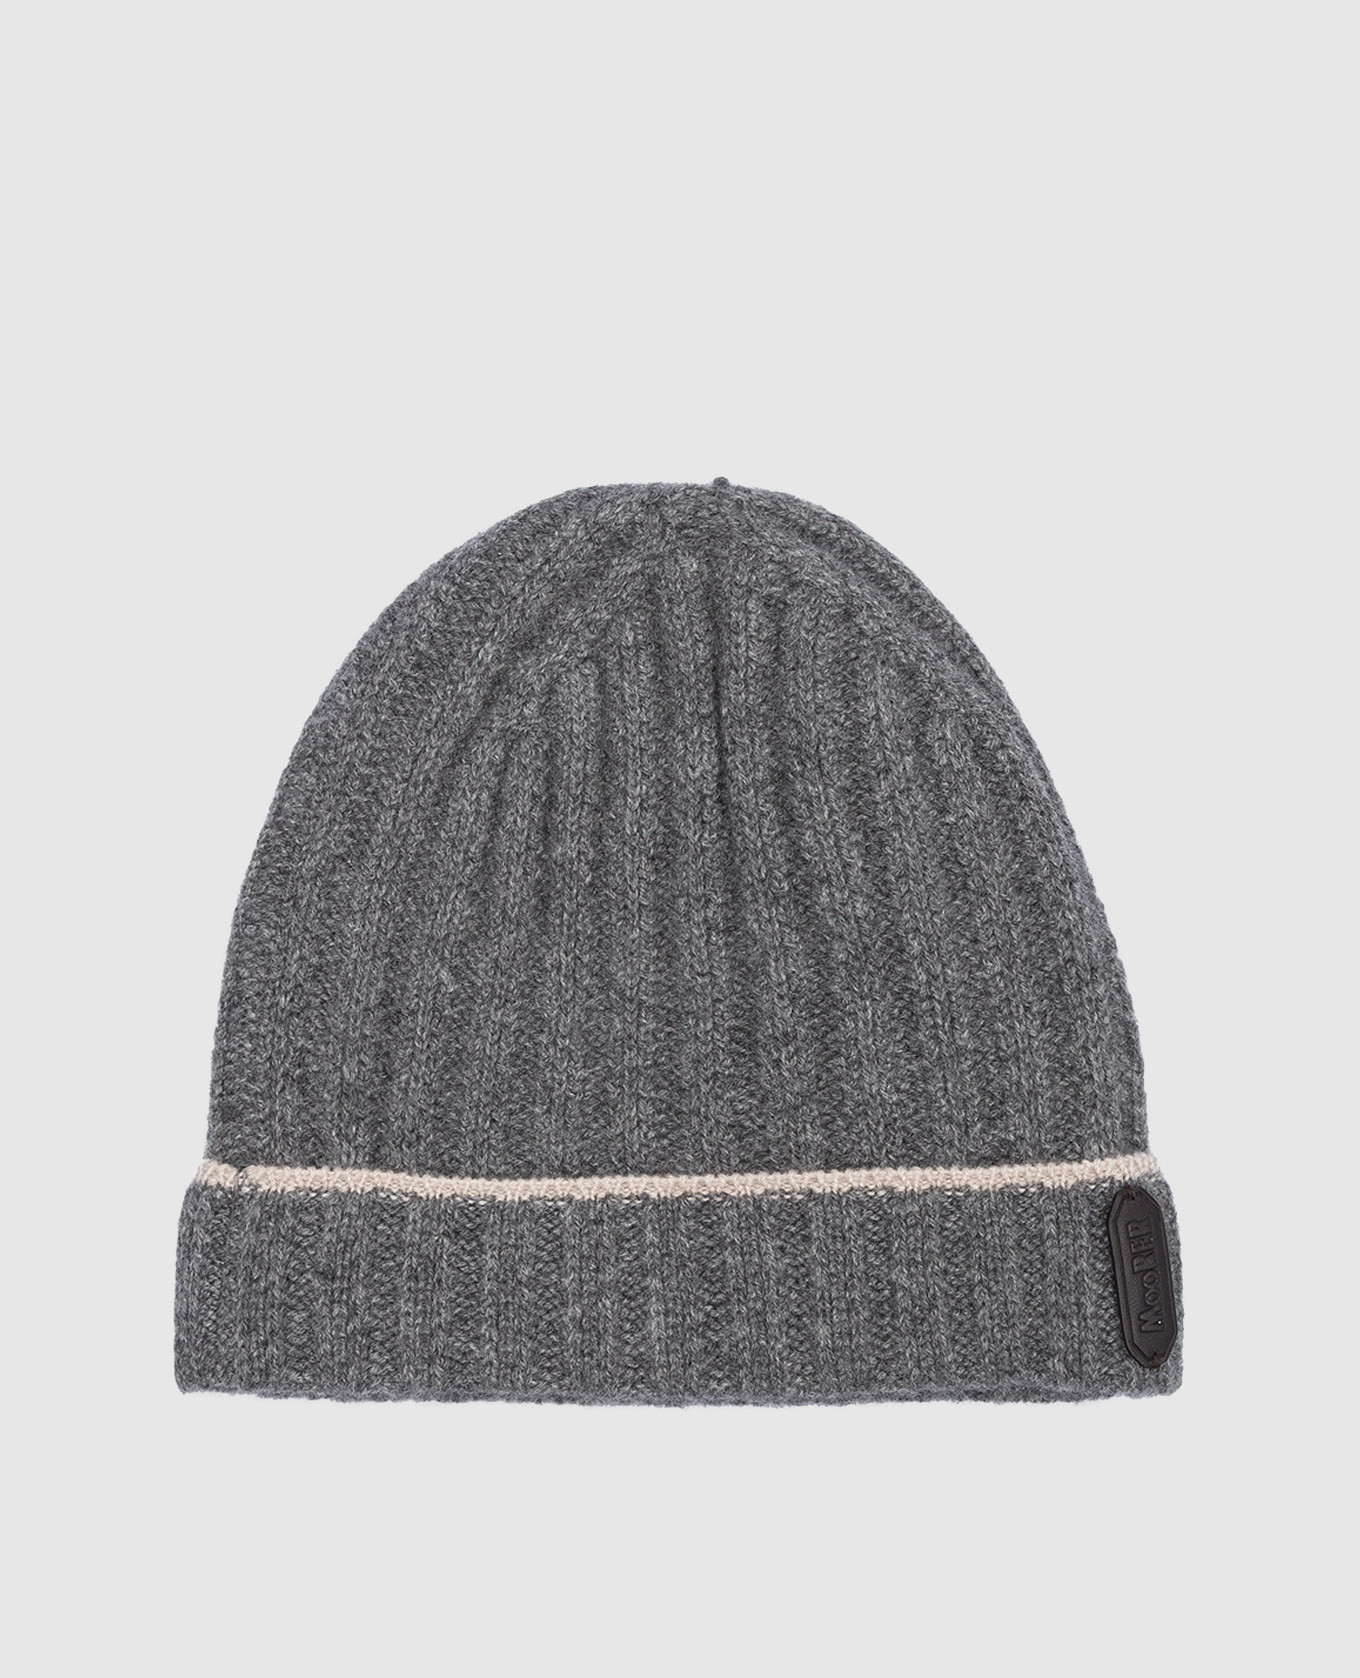 ASHER gray cashmere hat